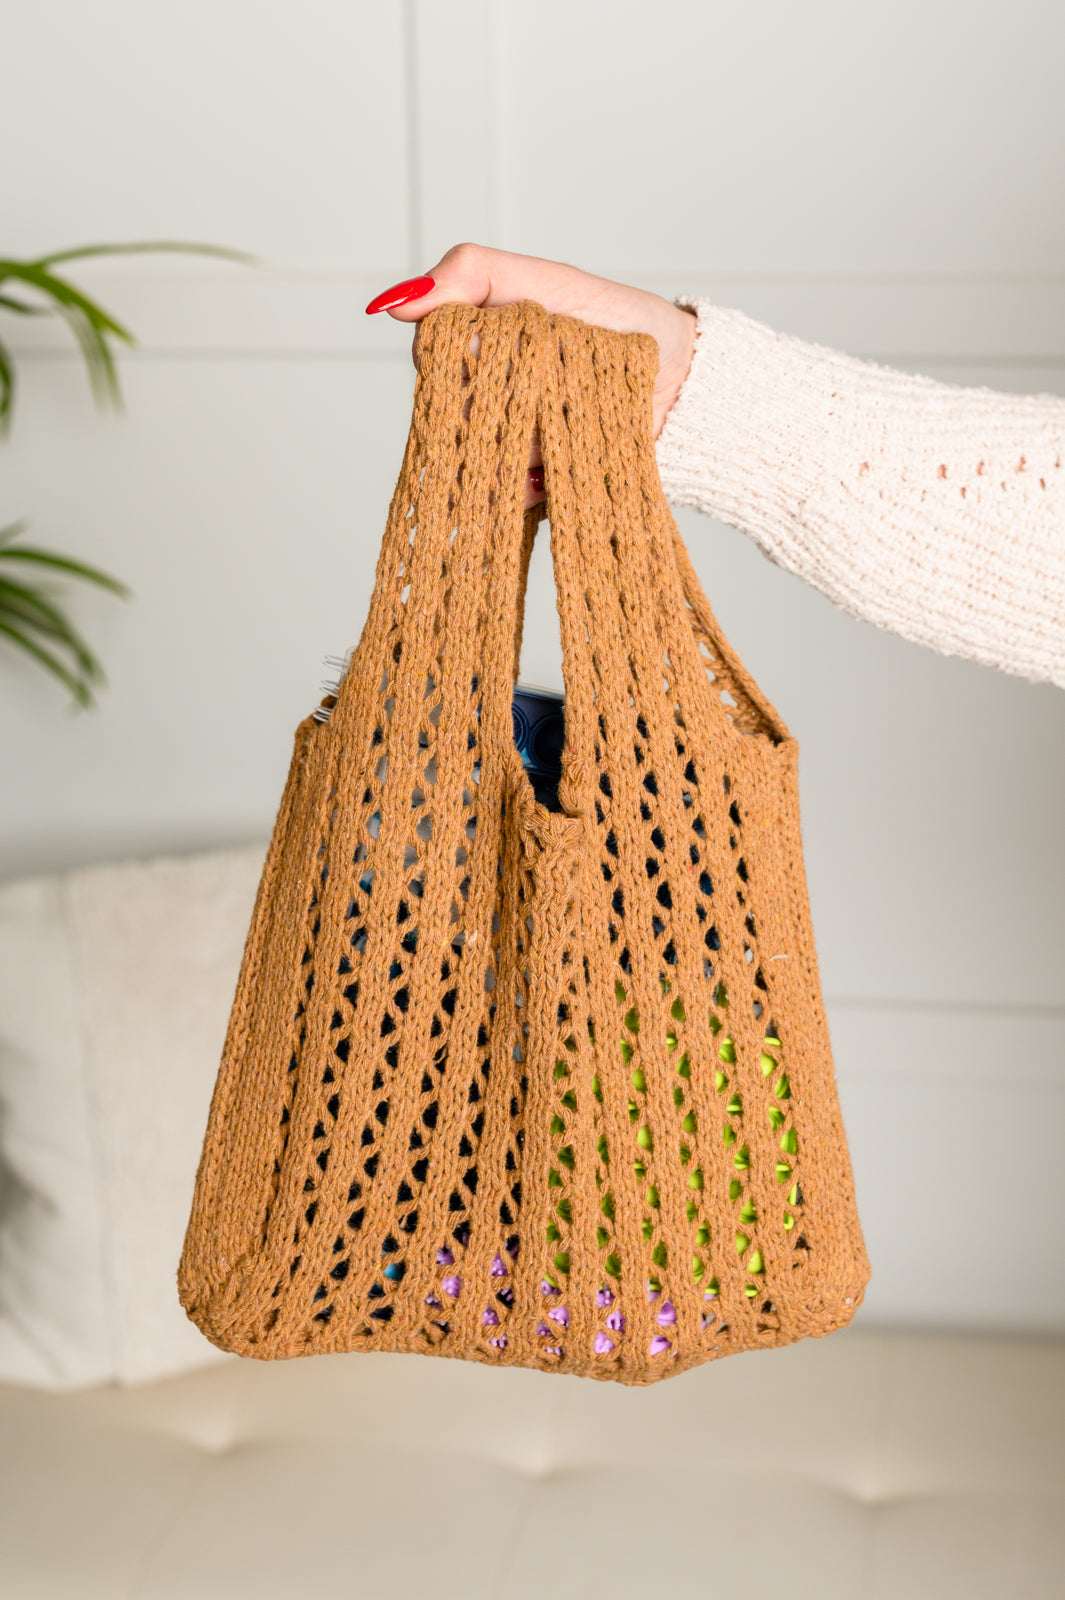 Girls Day Open Weave Bag in Tan - Southern Divas Boutique